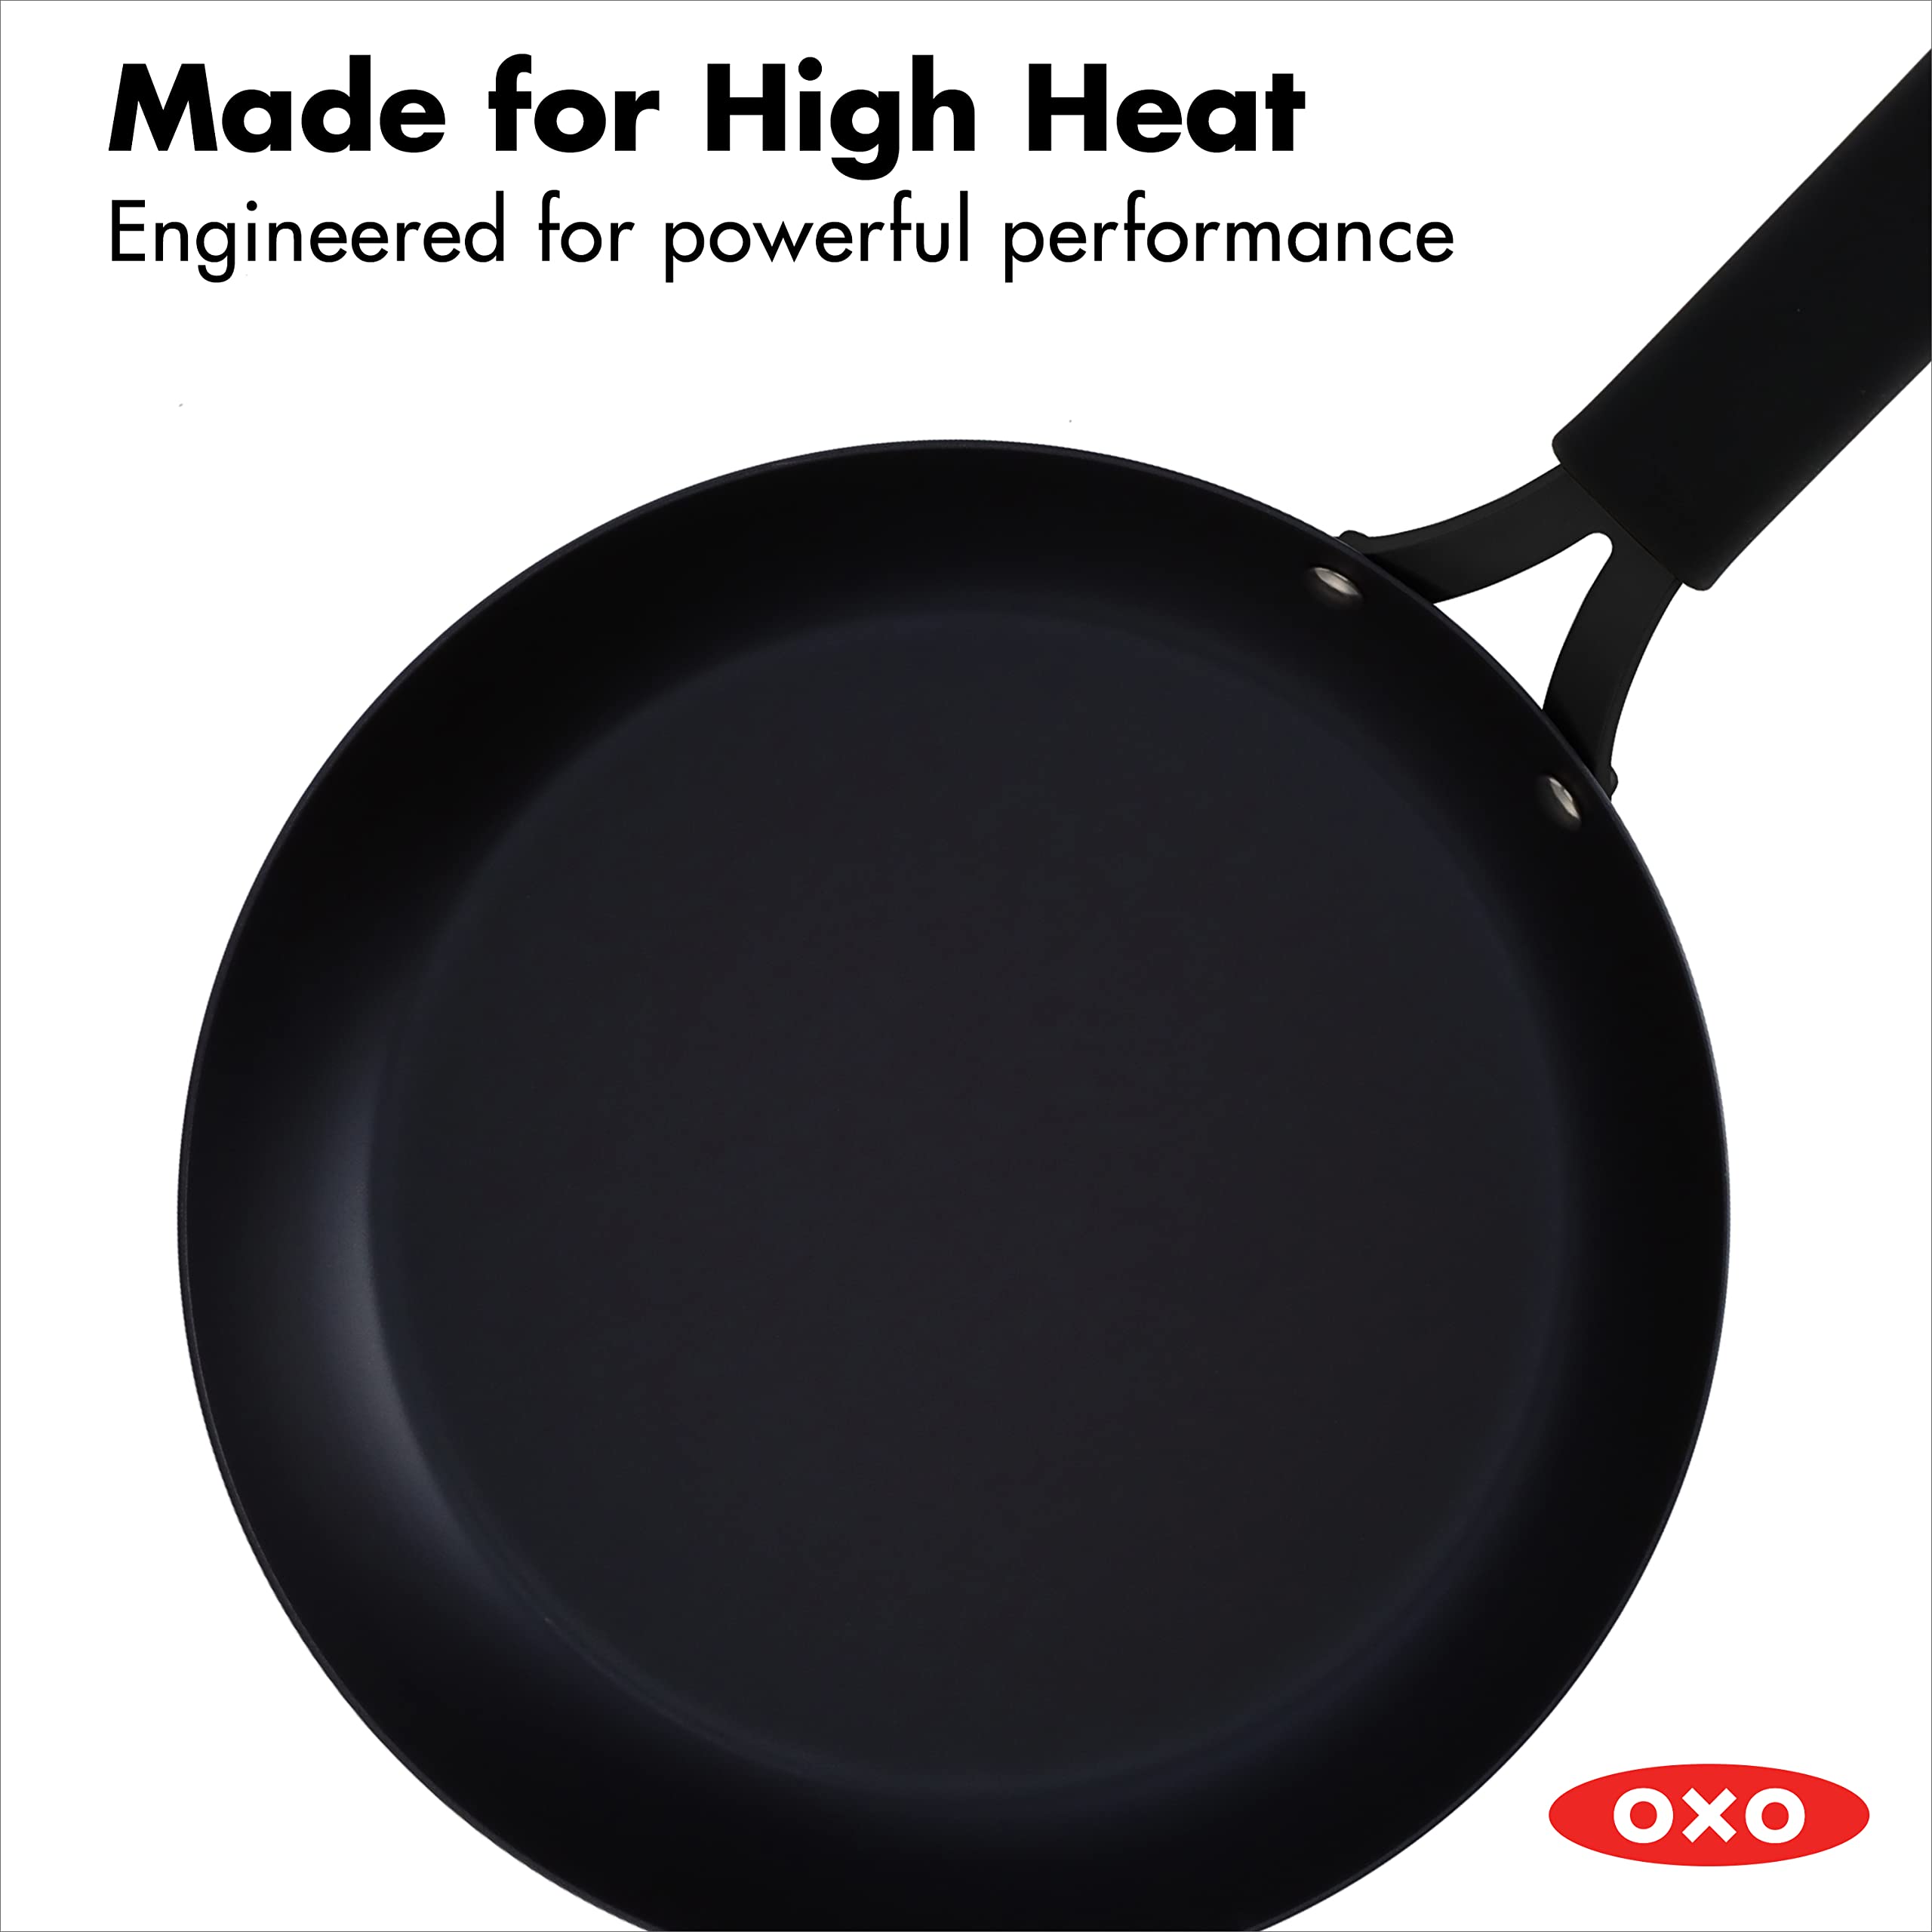 OXO Obsidian Pre-Seasoned Carbon Steel, 10" Frying Pan Skillet with Removable Silicone Handle Holder, Induction, Oven Safe, Black